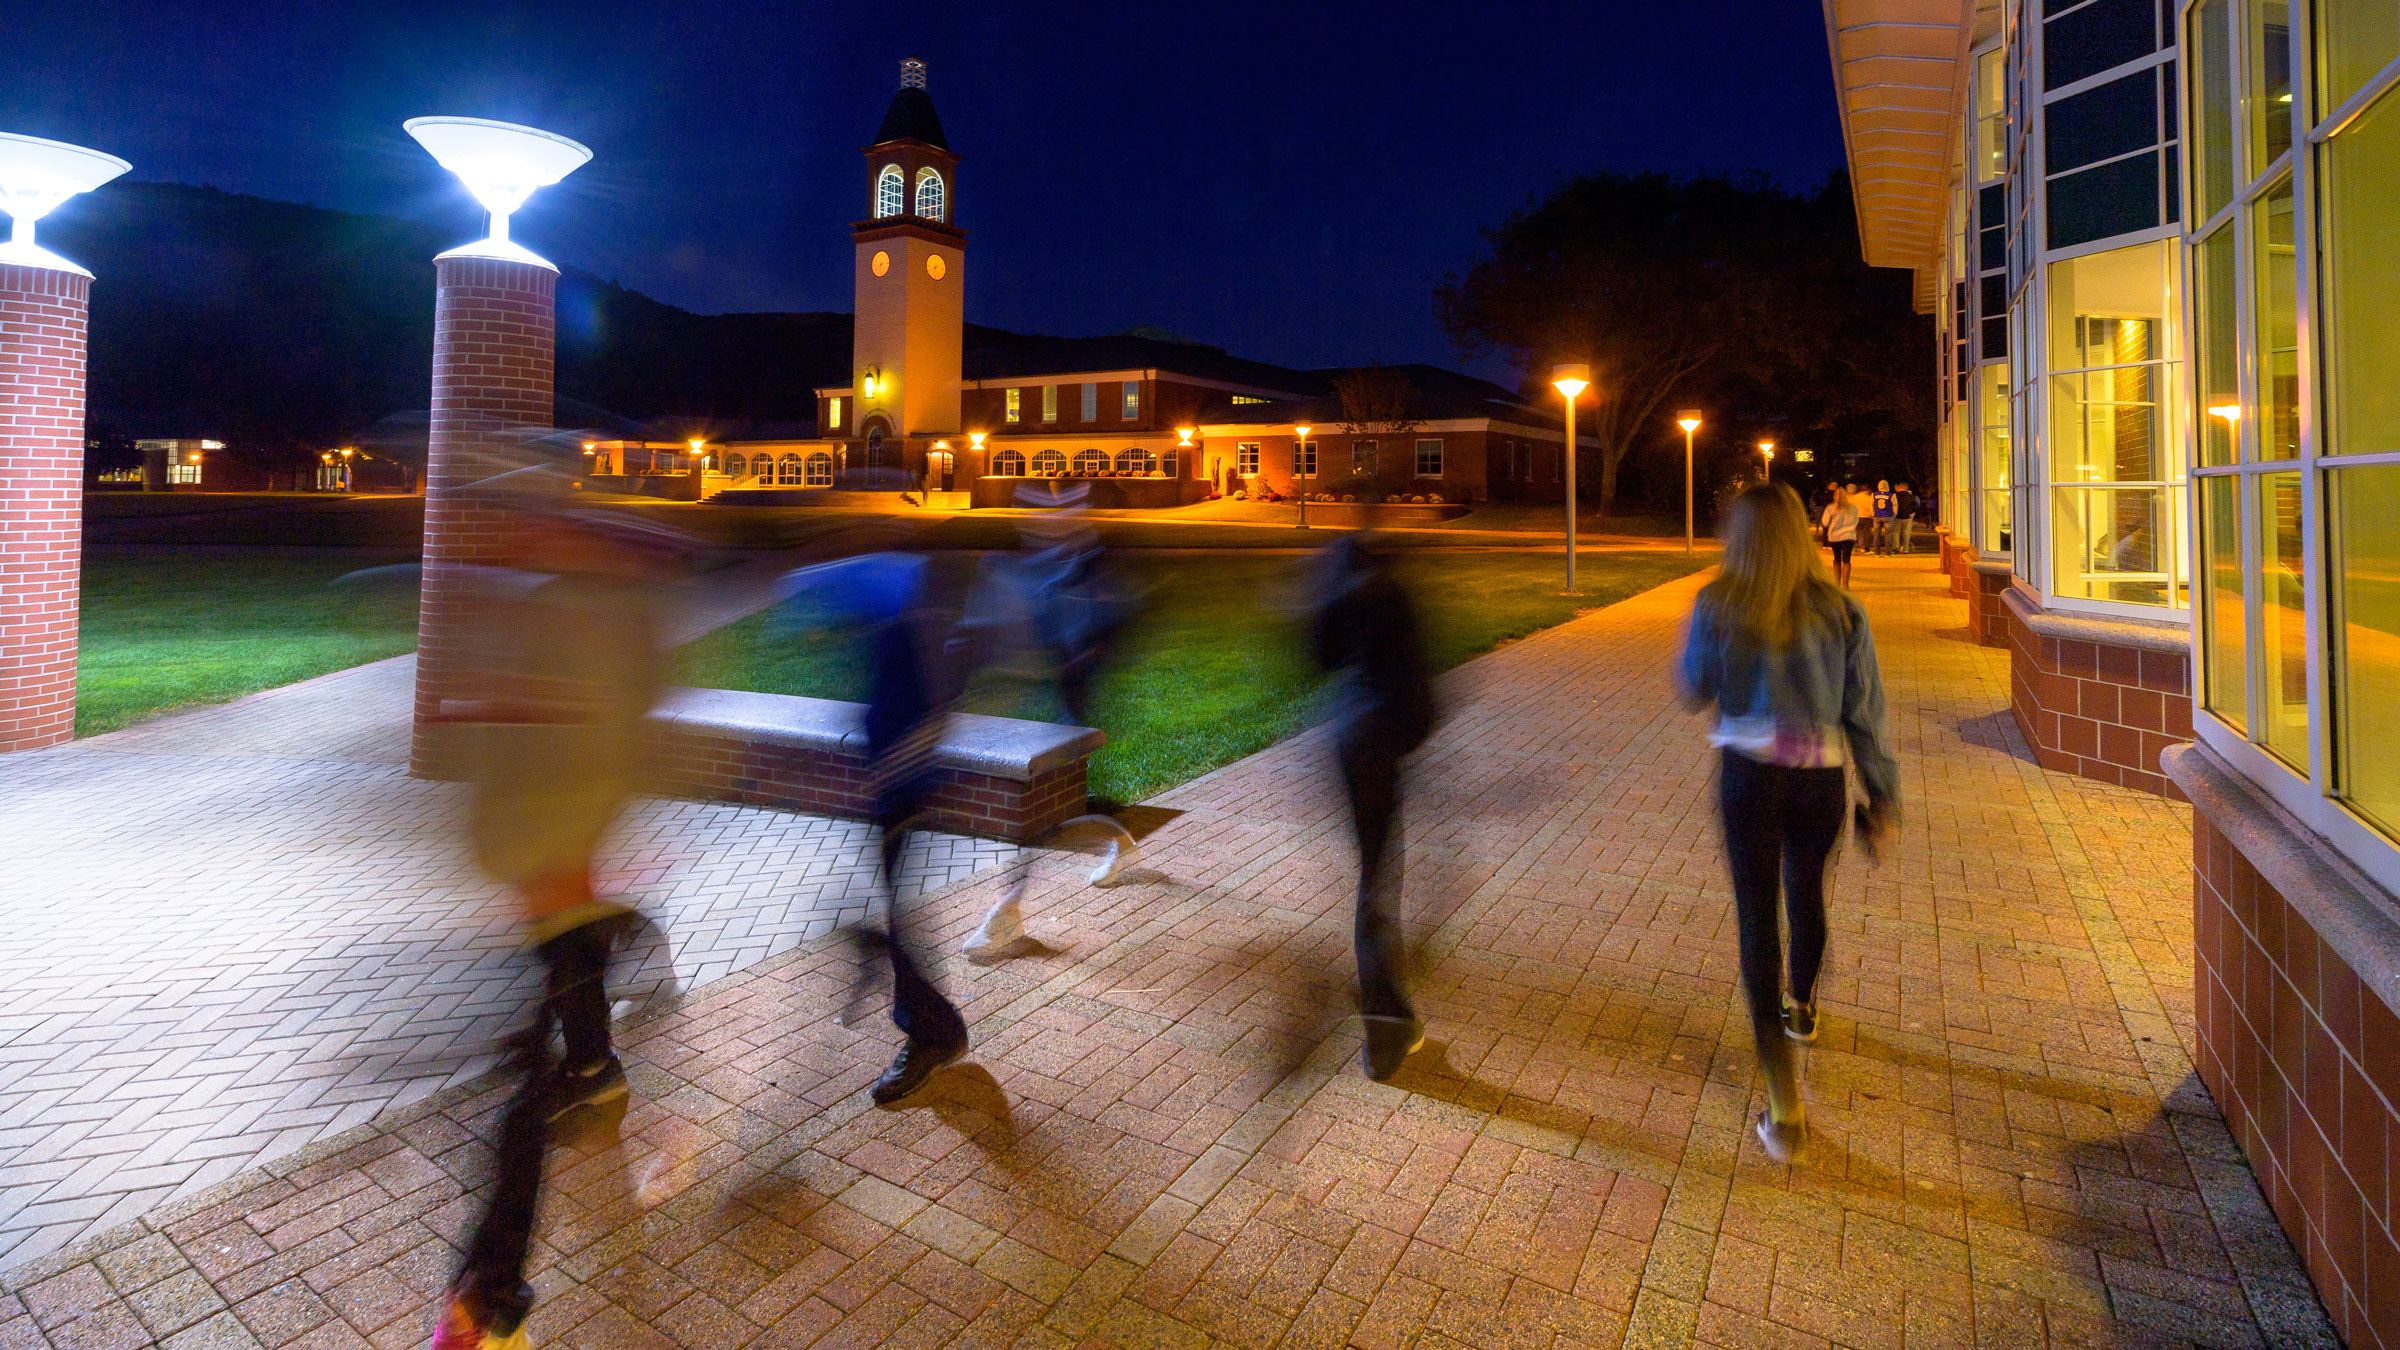 Half a dozen students walk next to the student center in with windows aglow in the evening.